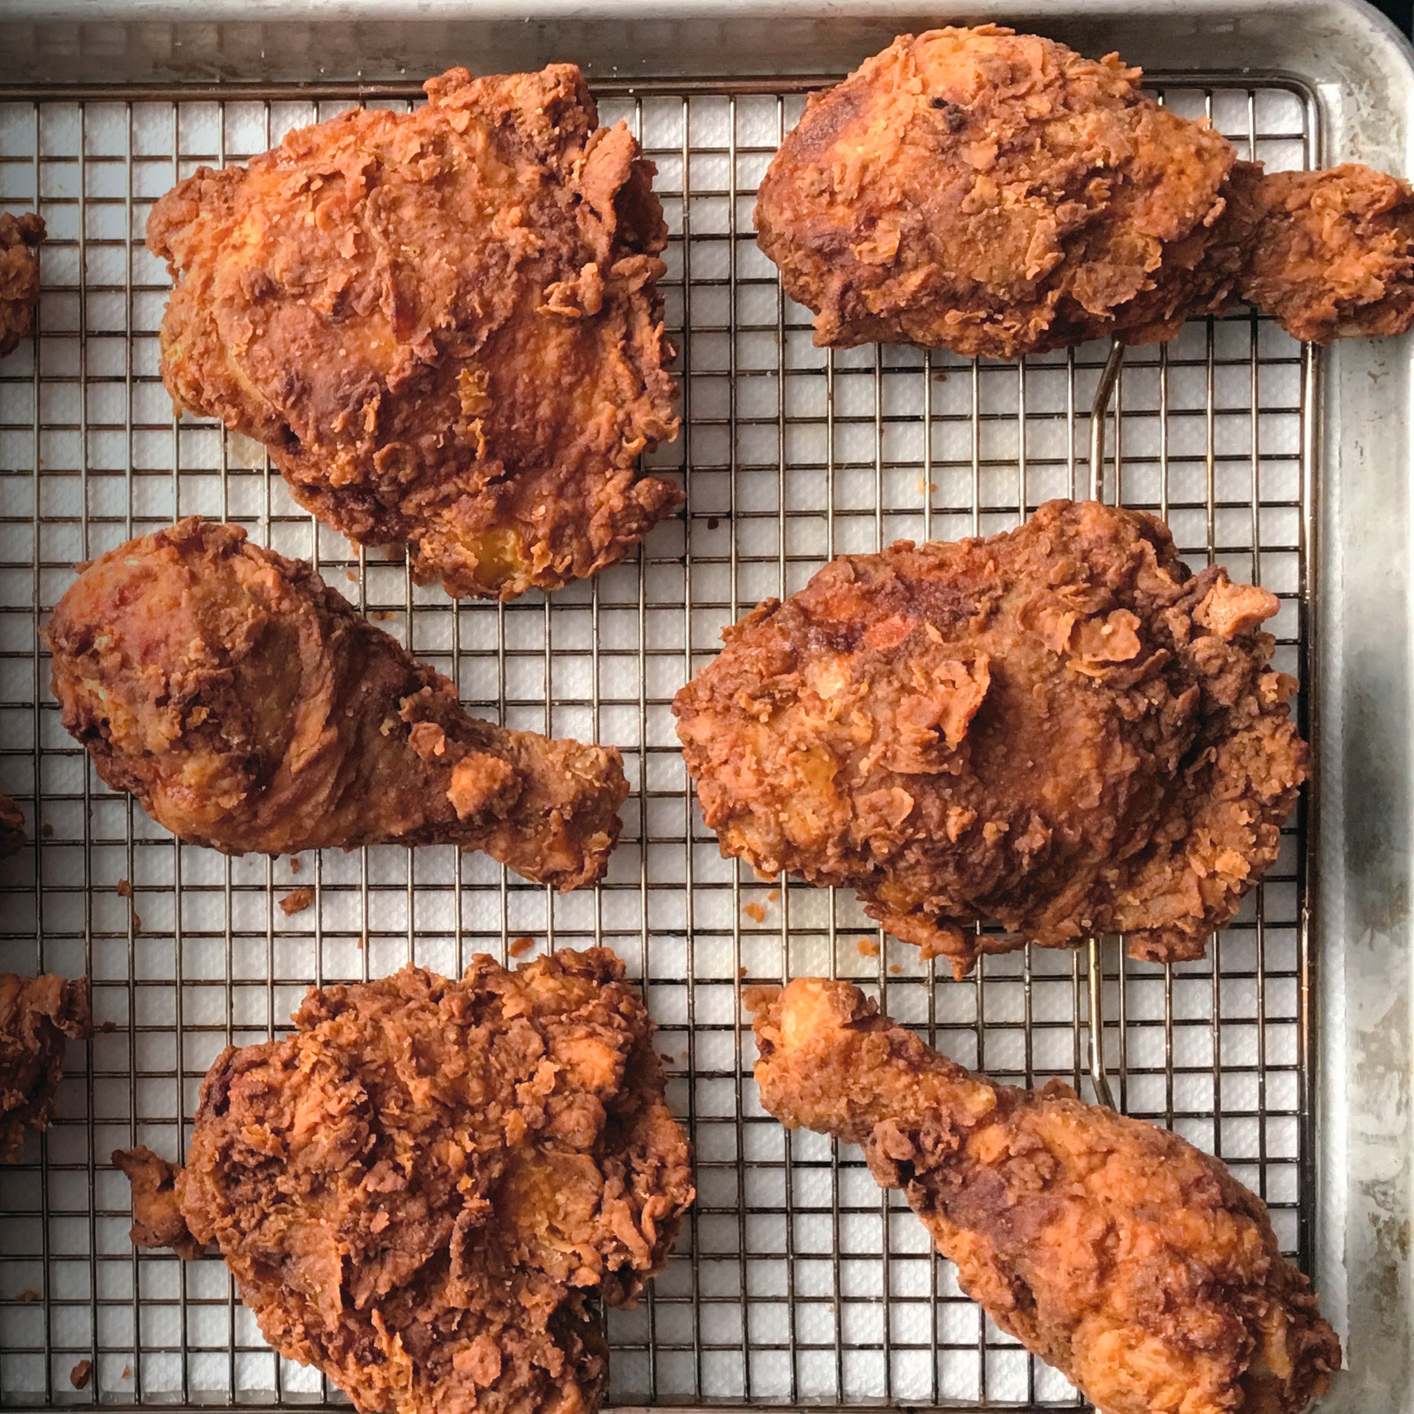 The General’s Fried Chicken